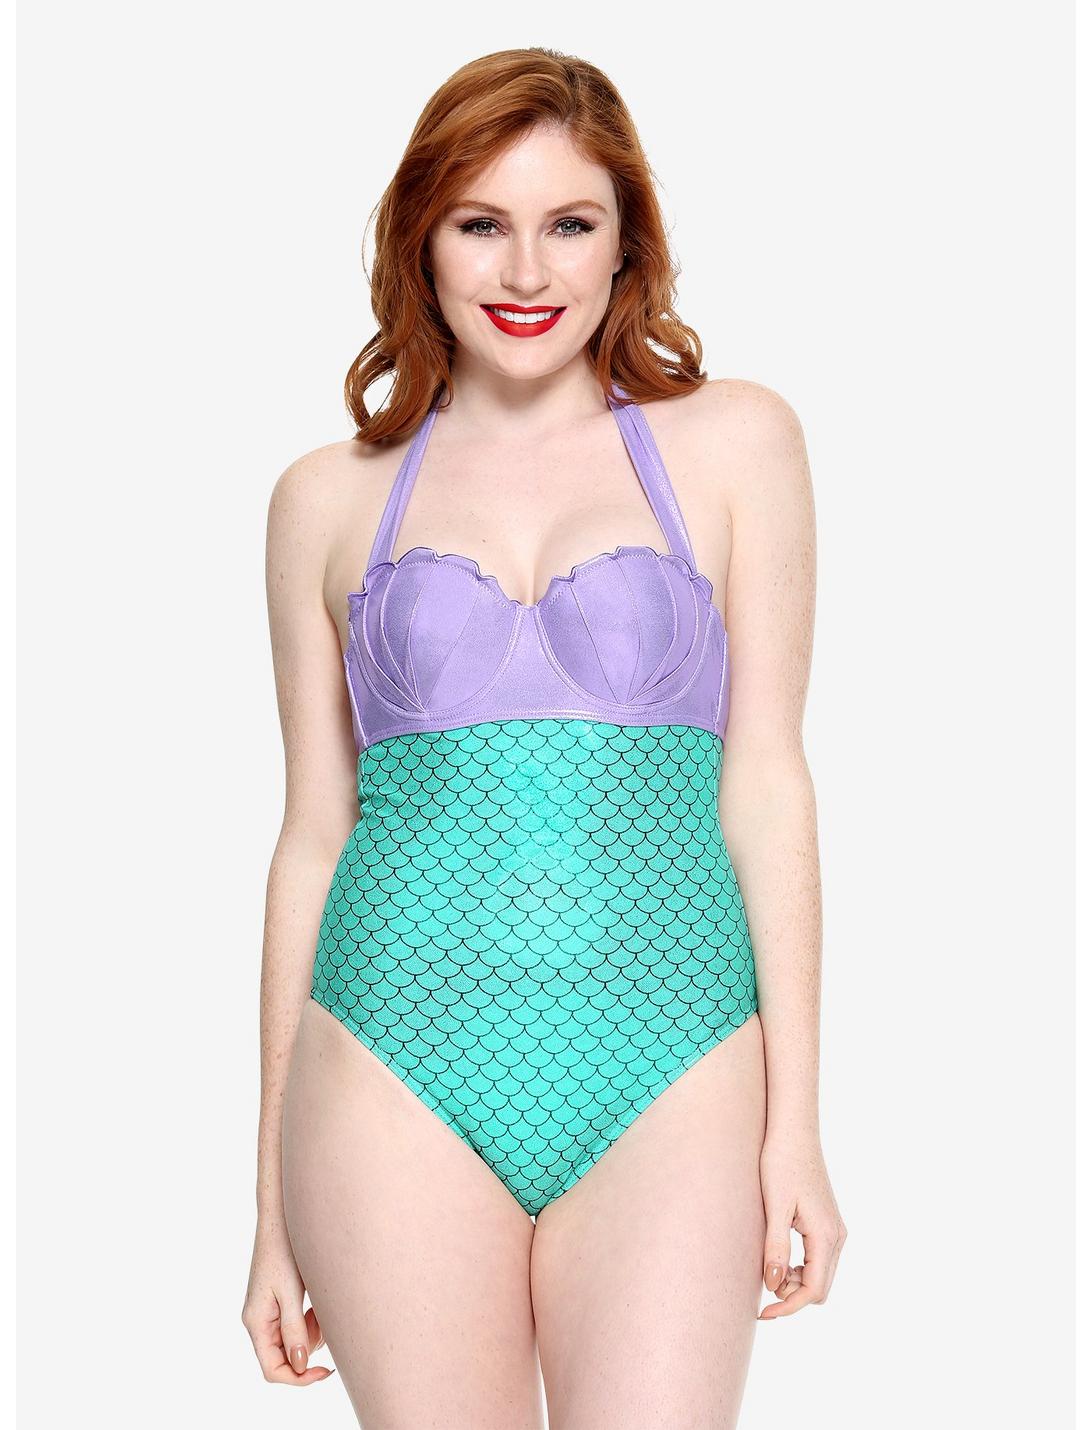 DISNEY Store SWIMSUIT for Girls ARIEL 1 Piece THE LITTLE MERMAID Select Size NWT